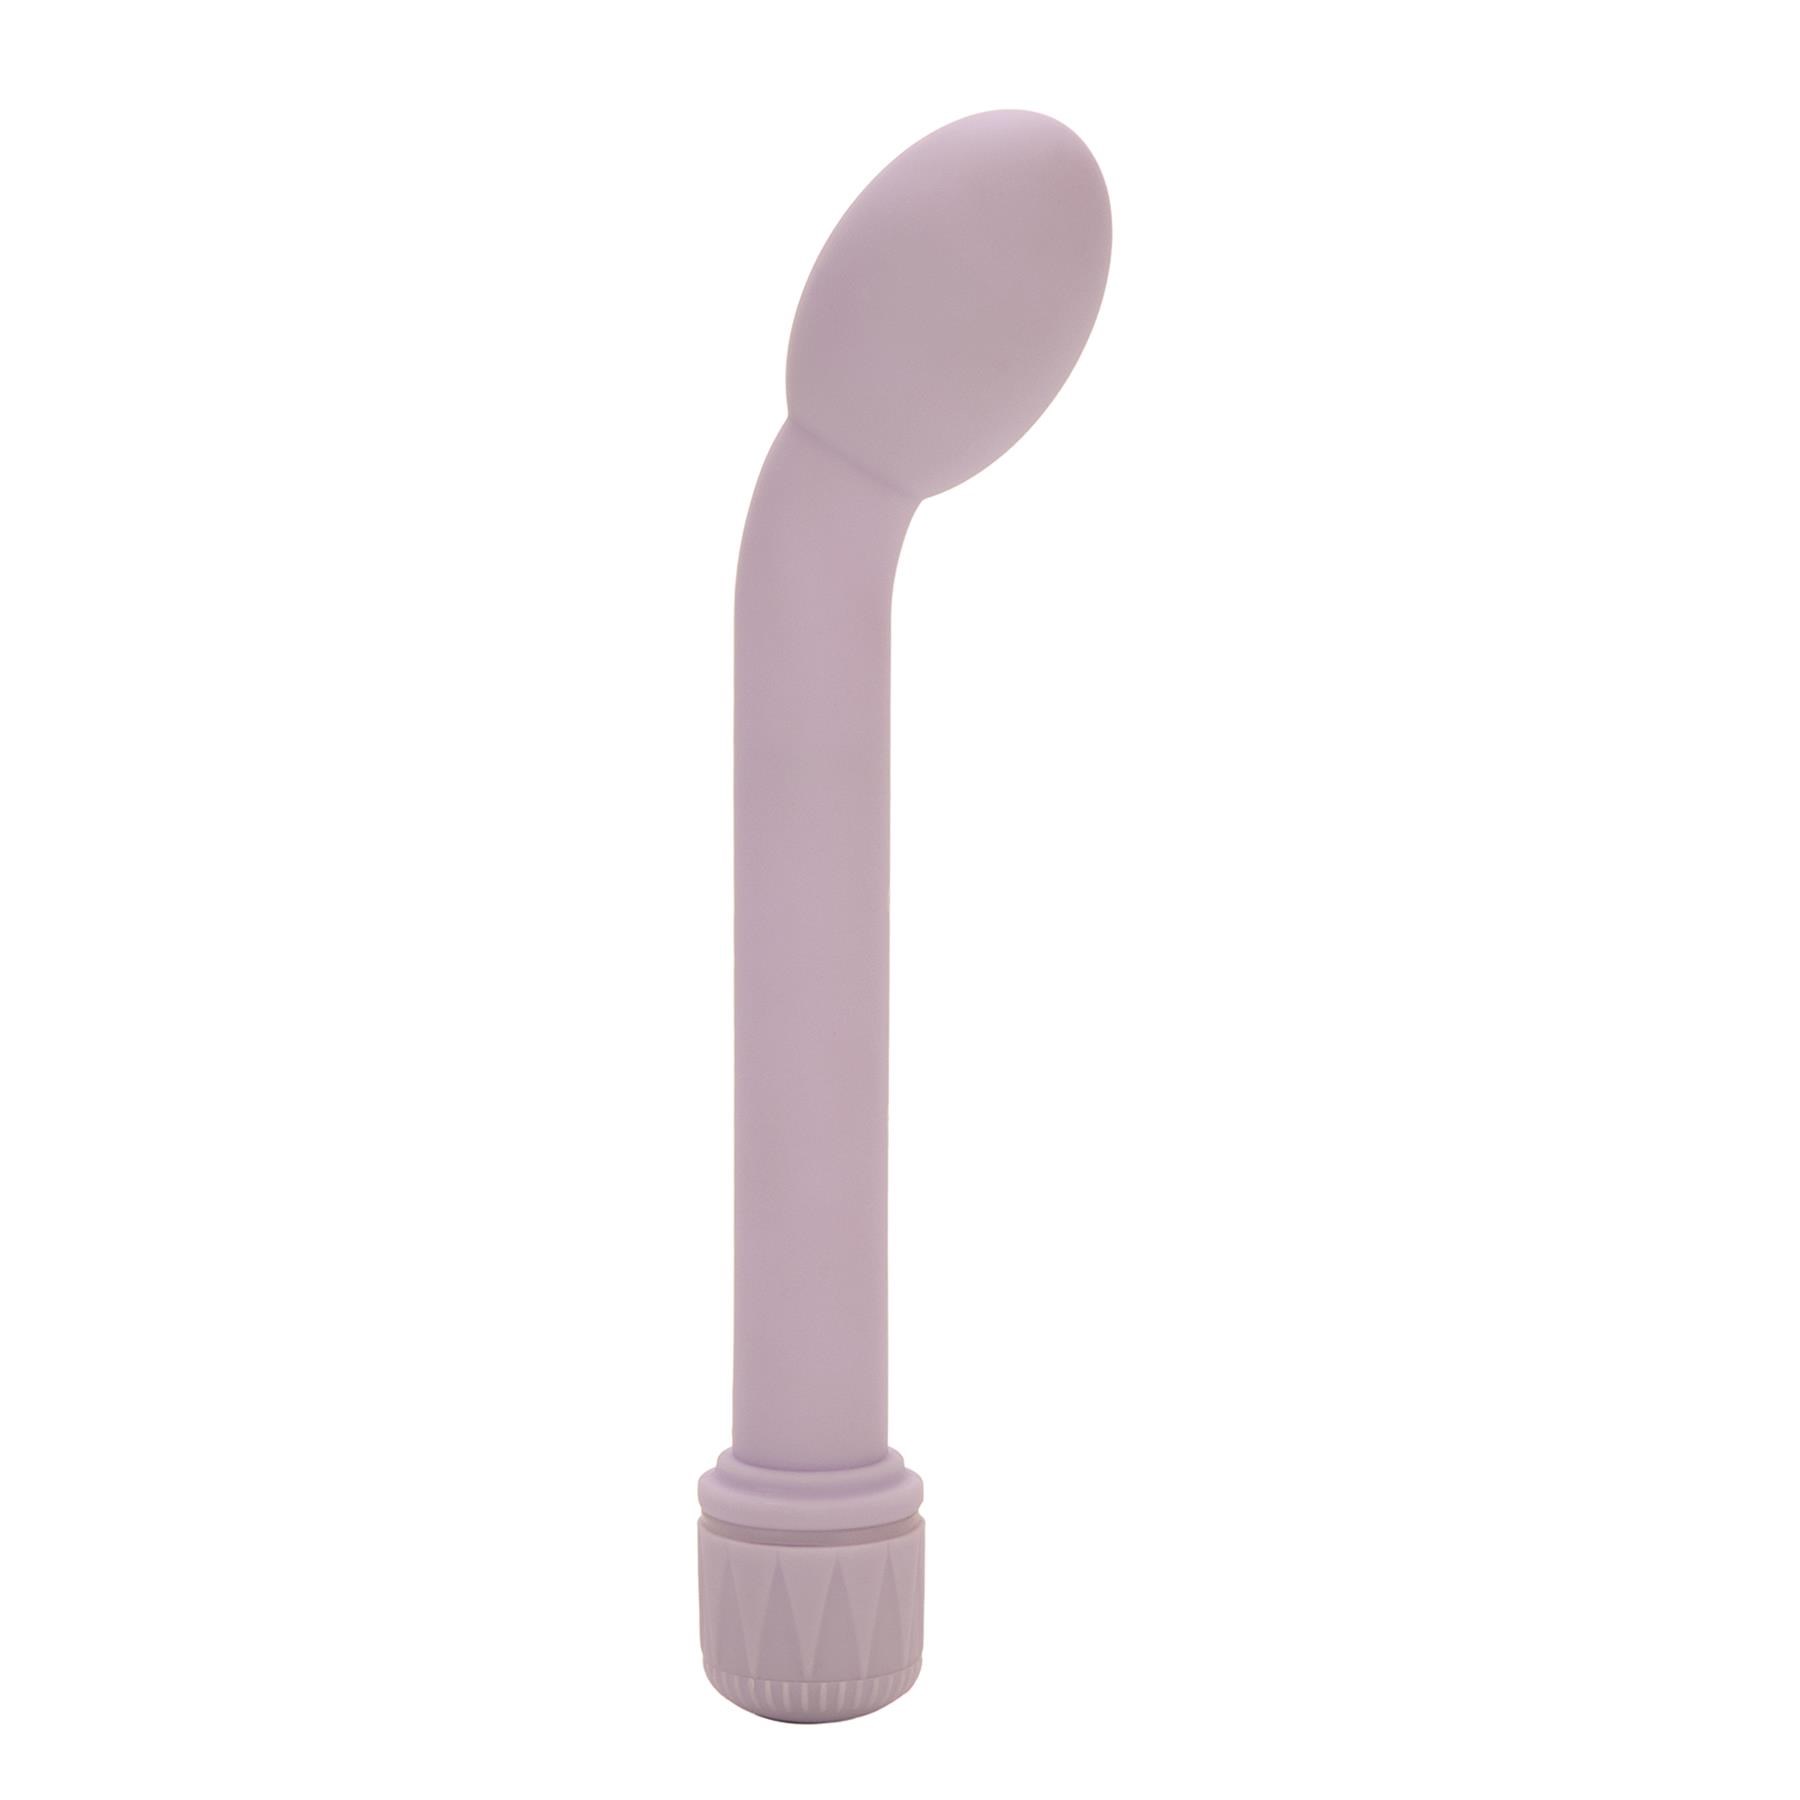 First Time G-Spot Tulip Upright Product Shot With G-Spot Tip to the Right